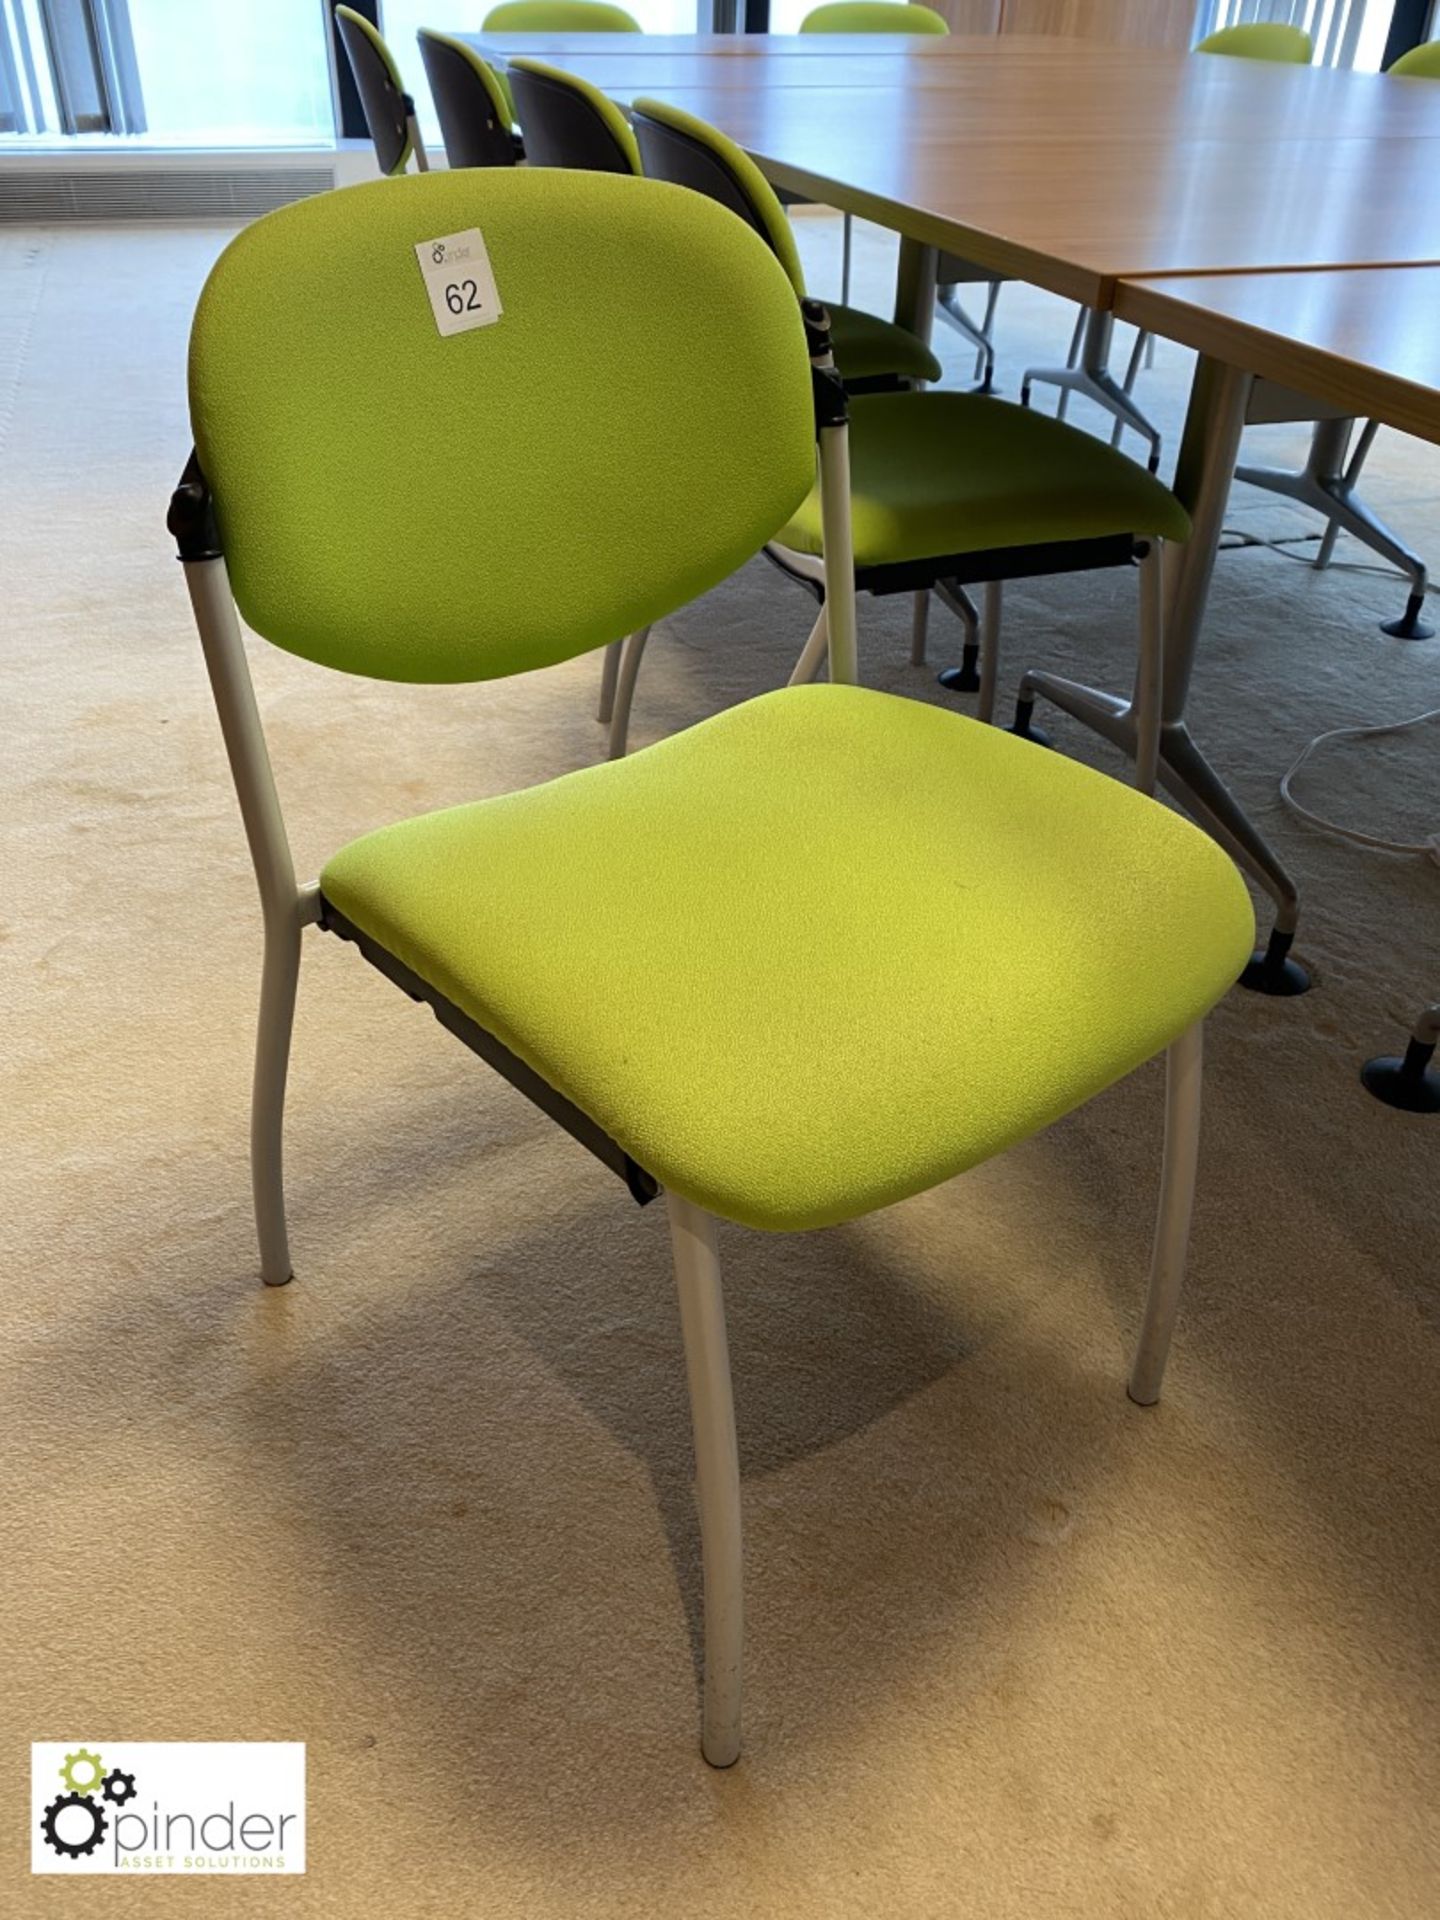 Set 4 Broadstock upholstered Meeting Chairs, lime green (located in Meeting Room 14 on 23rd Floor)